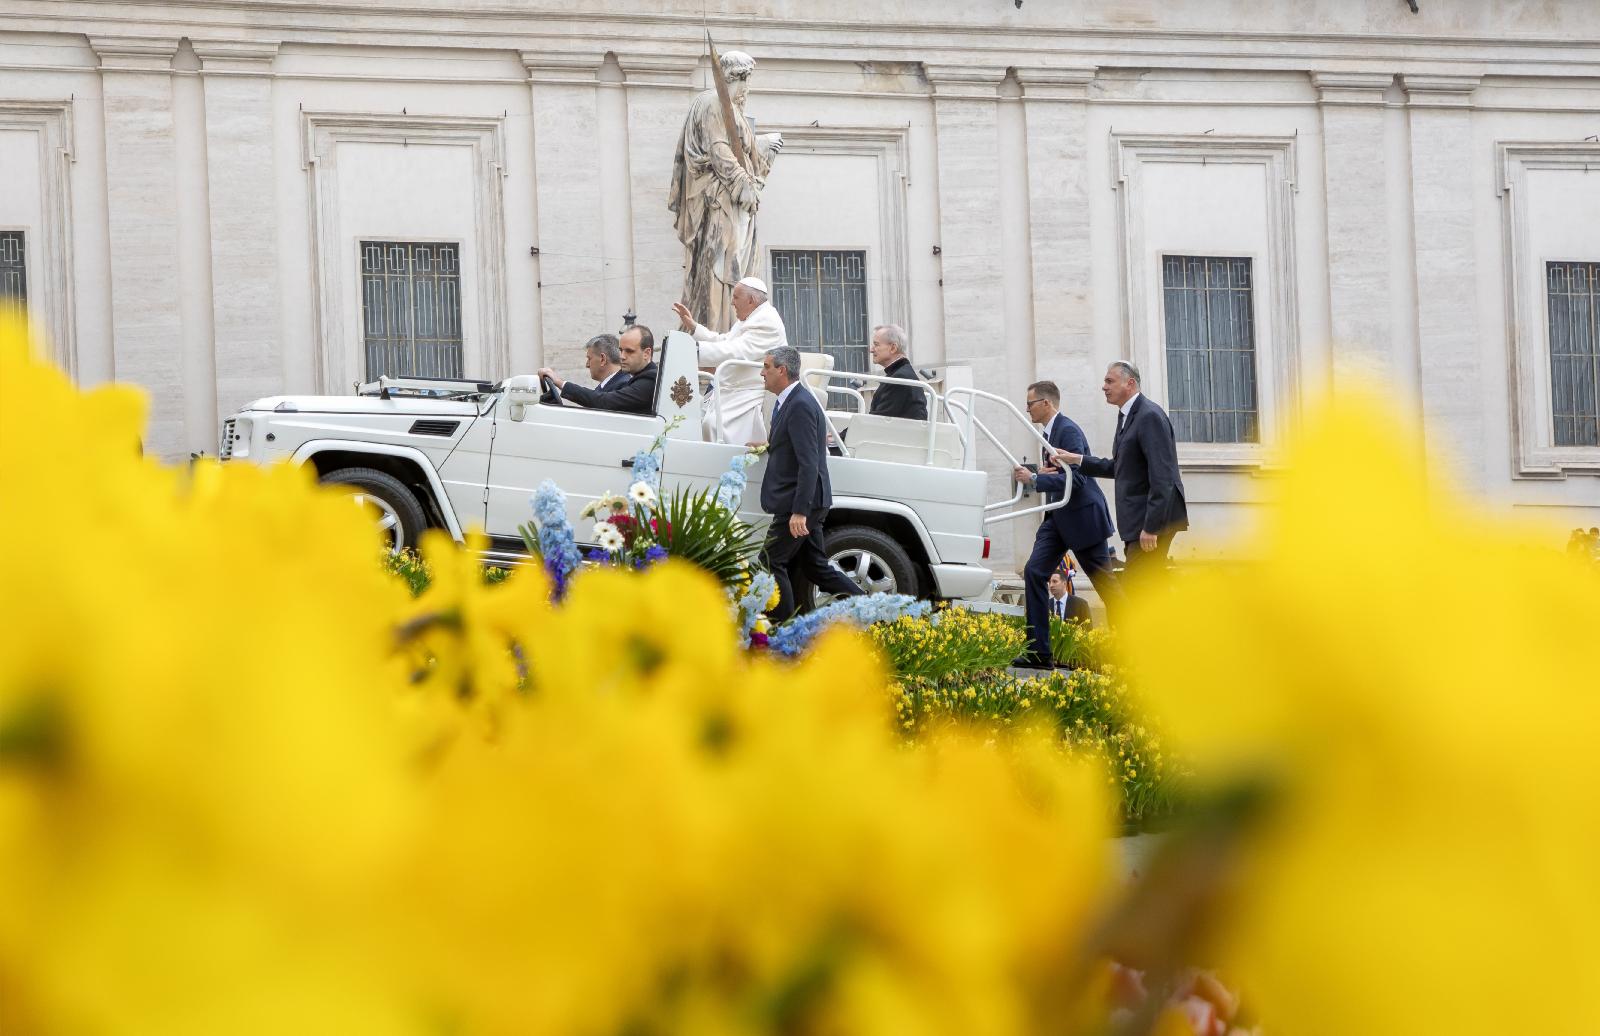 Pope Francis rides in the popemobile